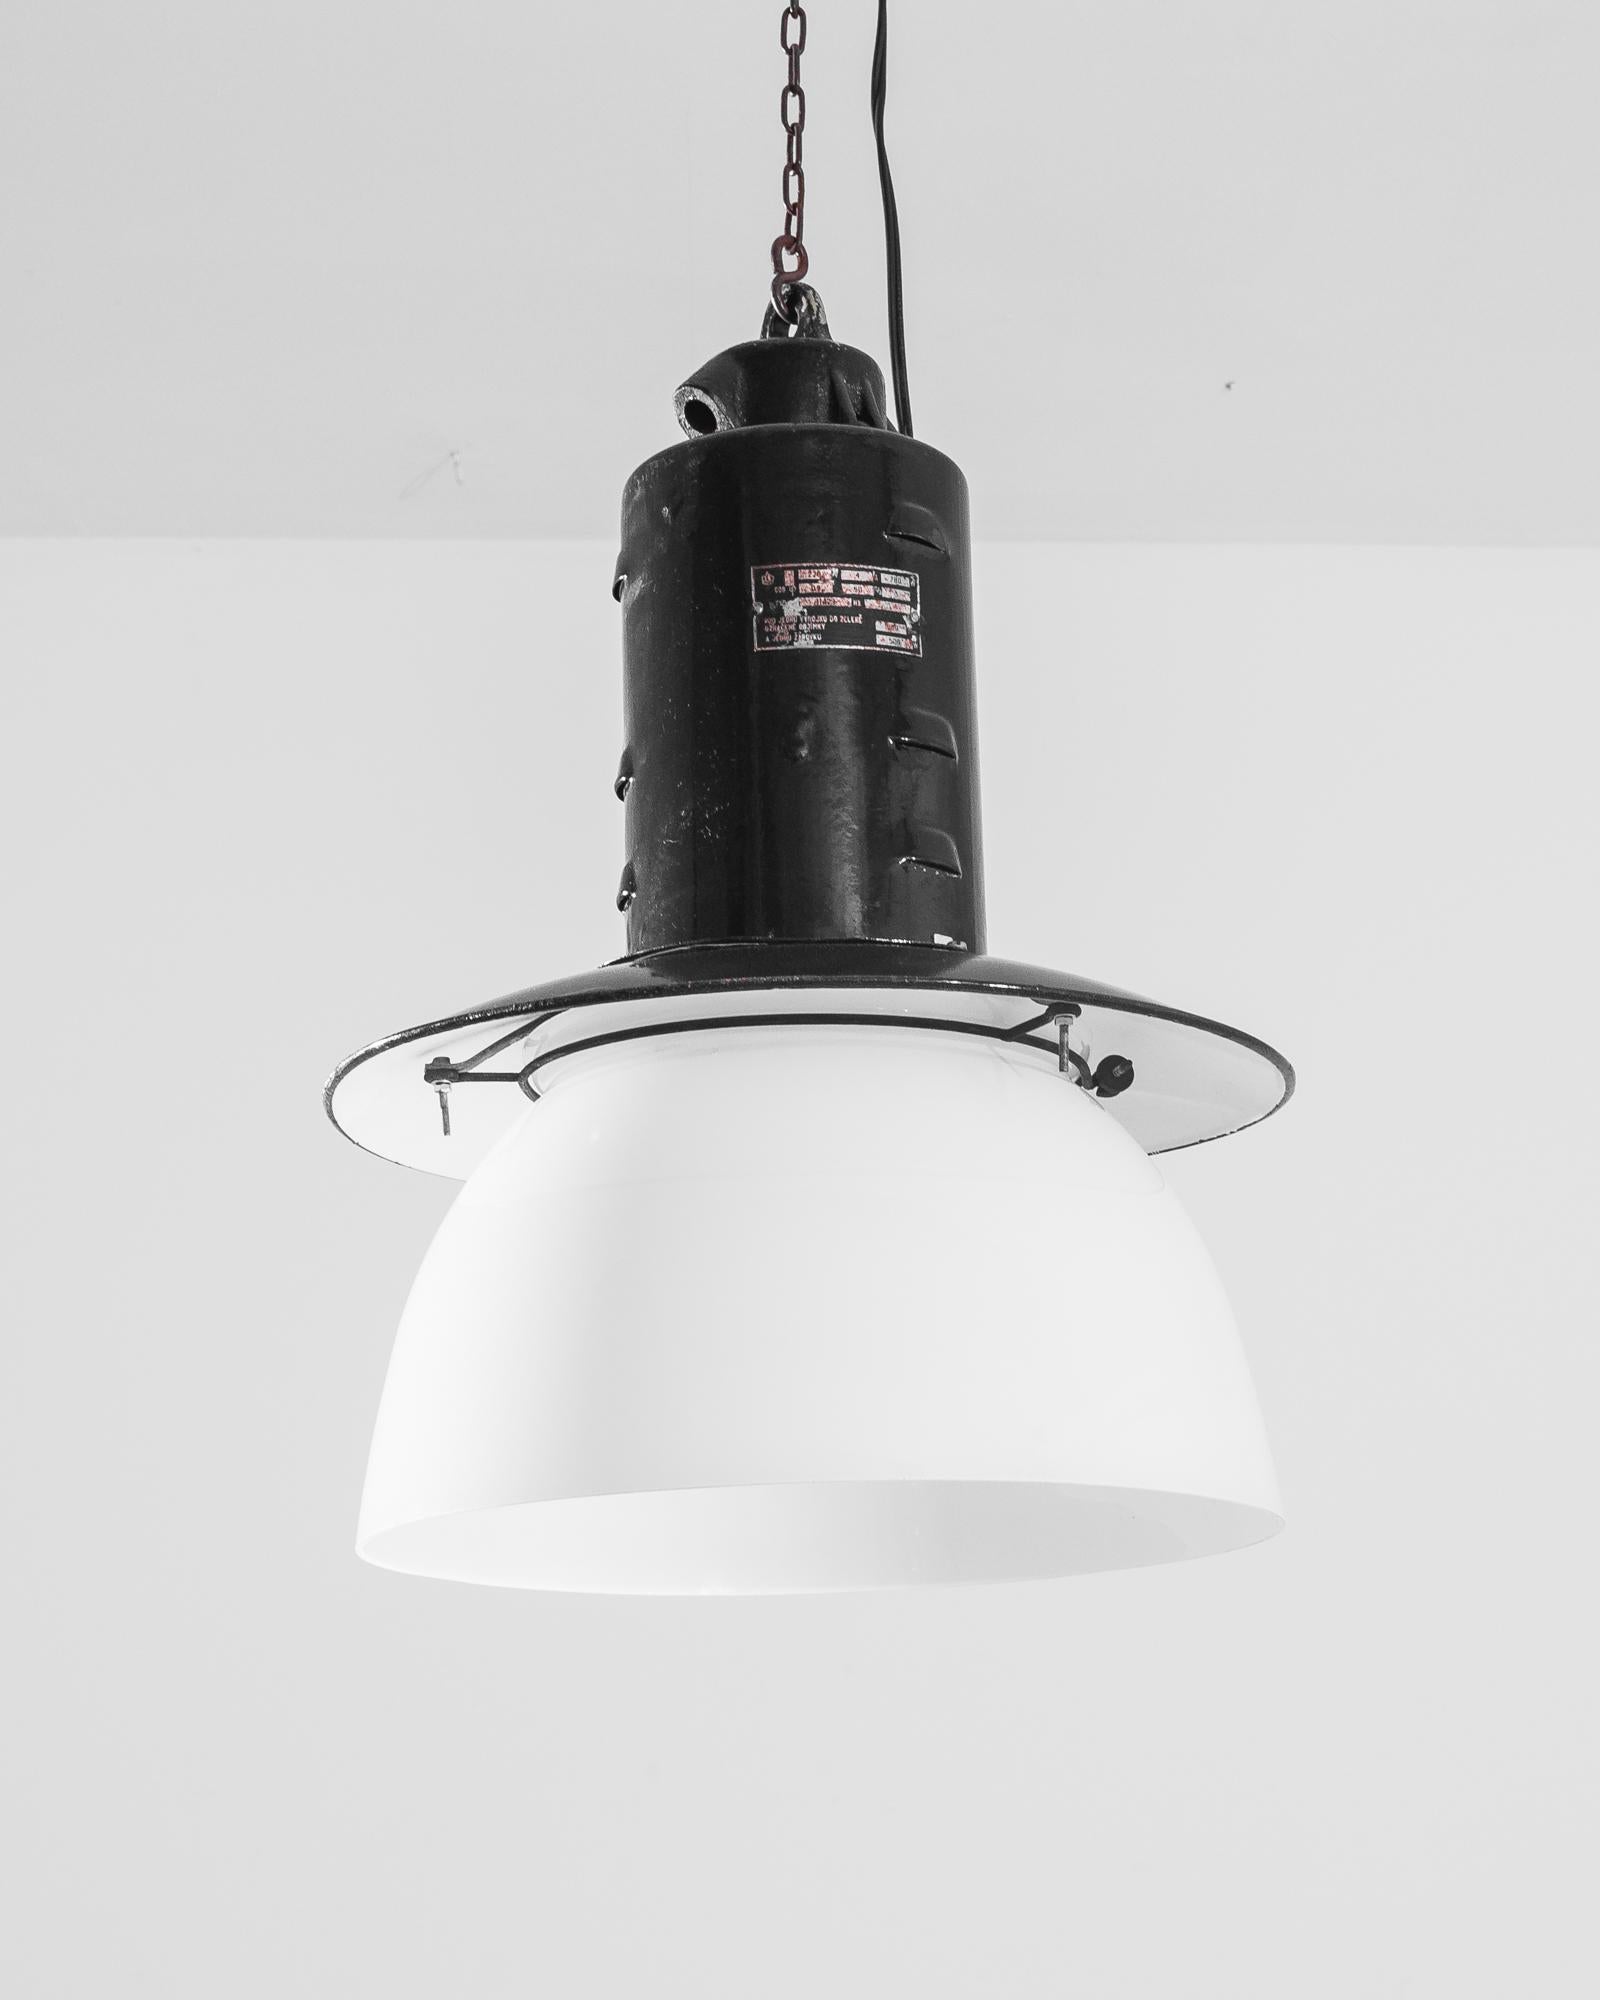 A metal industrial lamp from Czechia, produced circa 1930. Black metal cylinder suspended by chain from ceiling, blossoms into a shade covering a white glass bowl. This vintage lamp is an industrial stalactite from Central Europe stamped by the